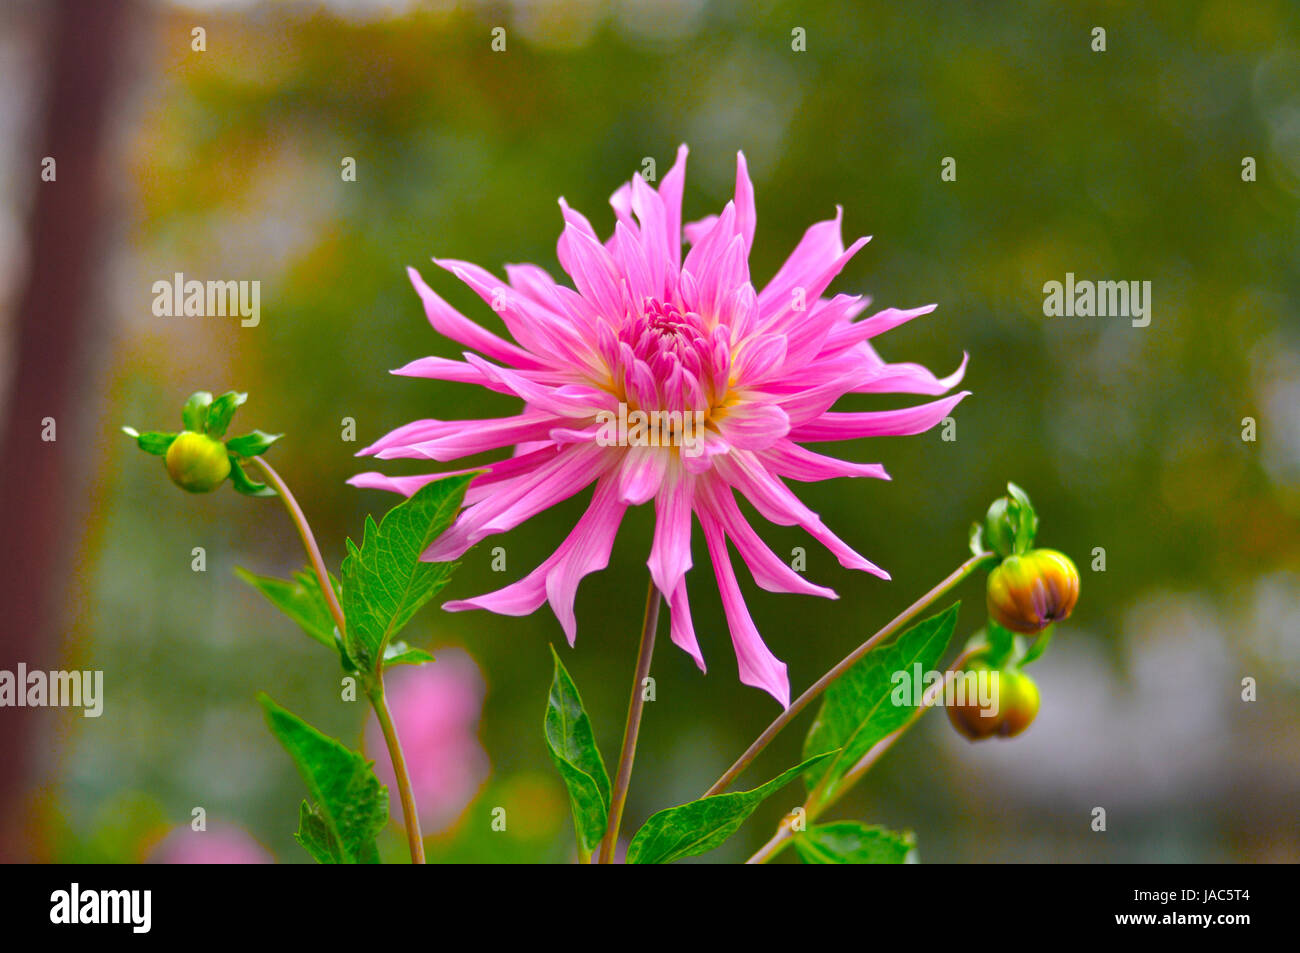 Pink Aster (Michaelmas daisy) close-up, Moscow region, Russia Stock Photo